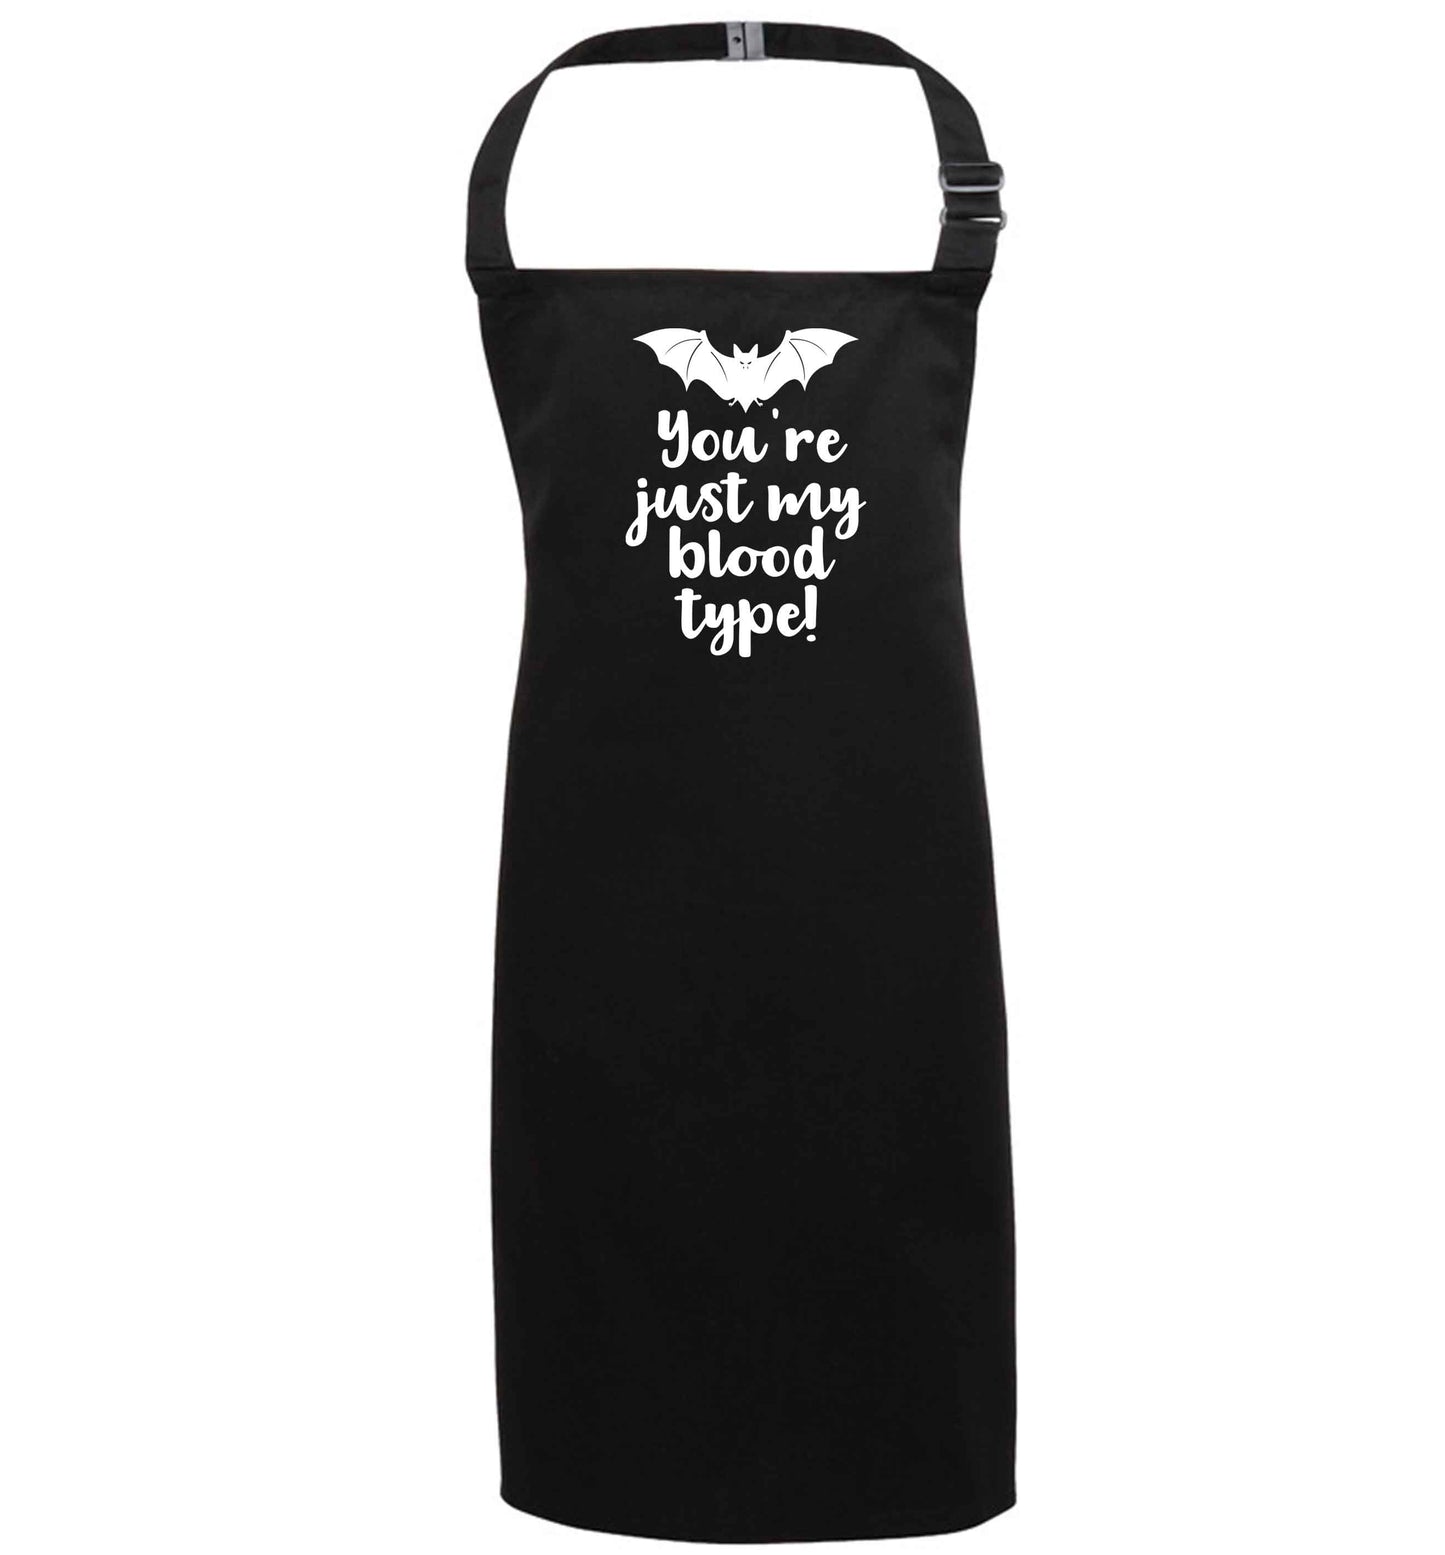 You're just my blood type black apron 7-10 years